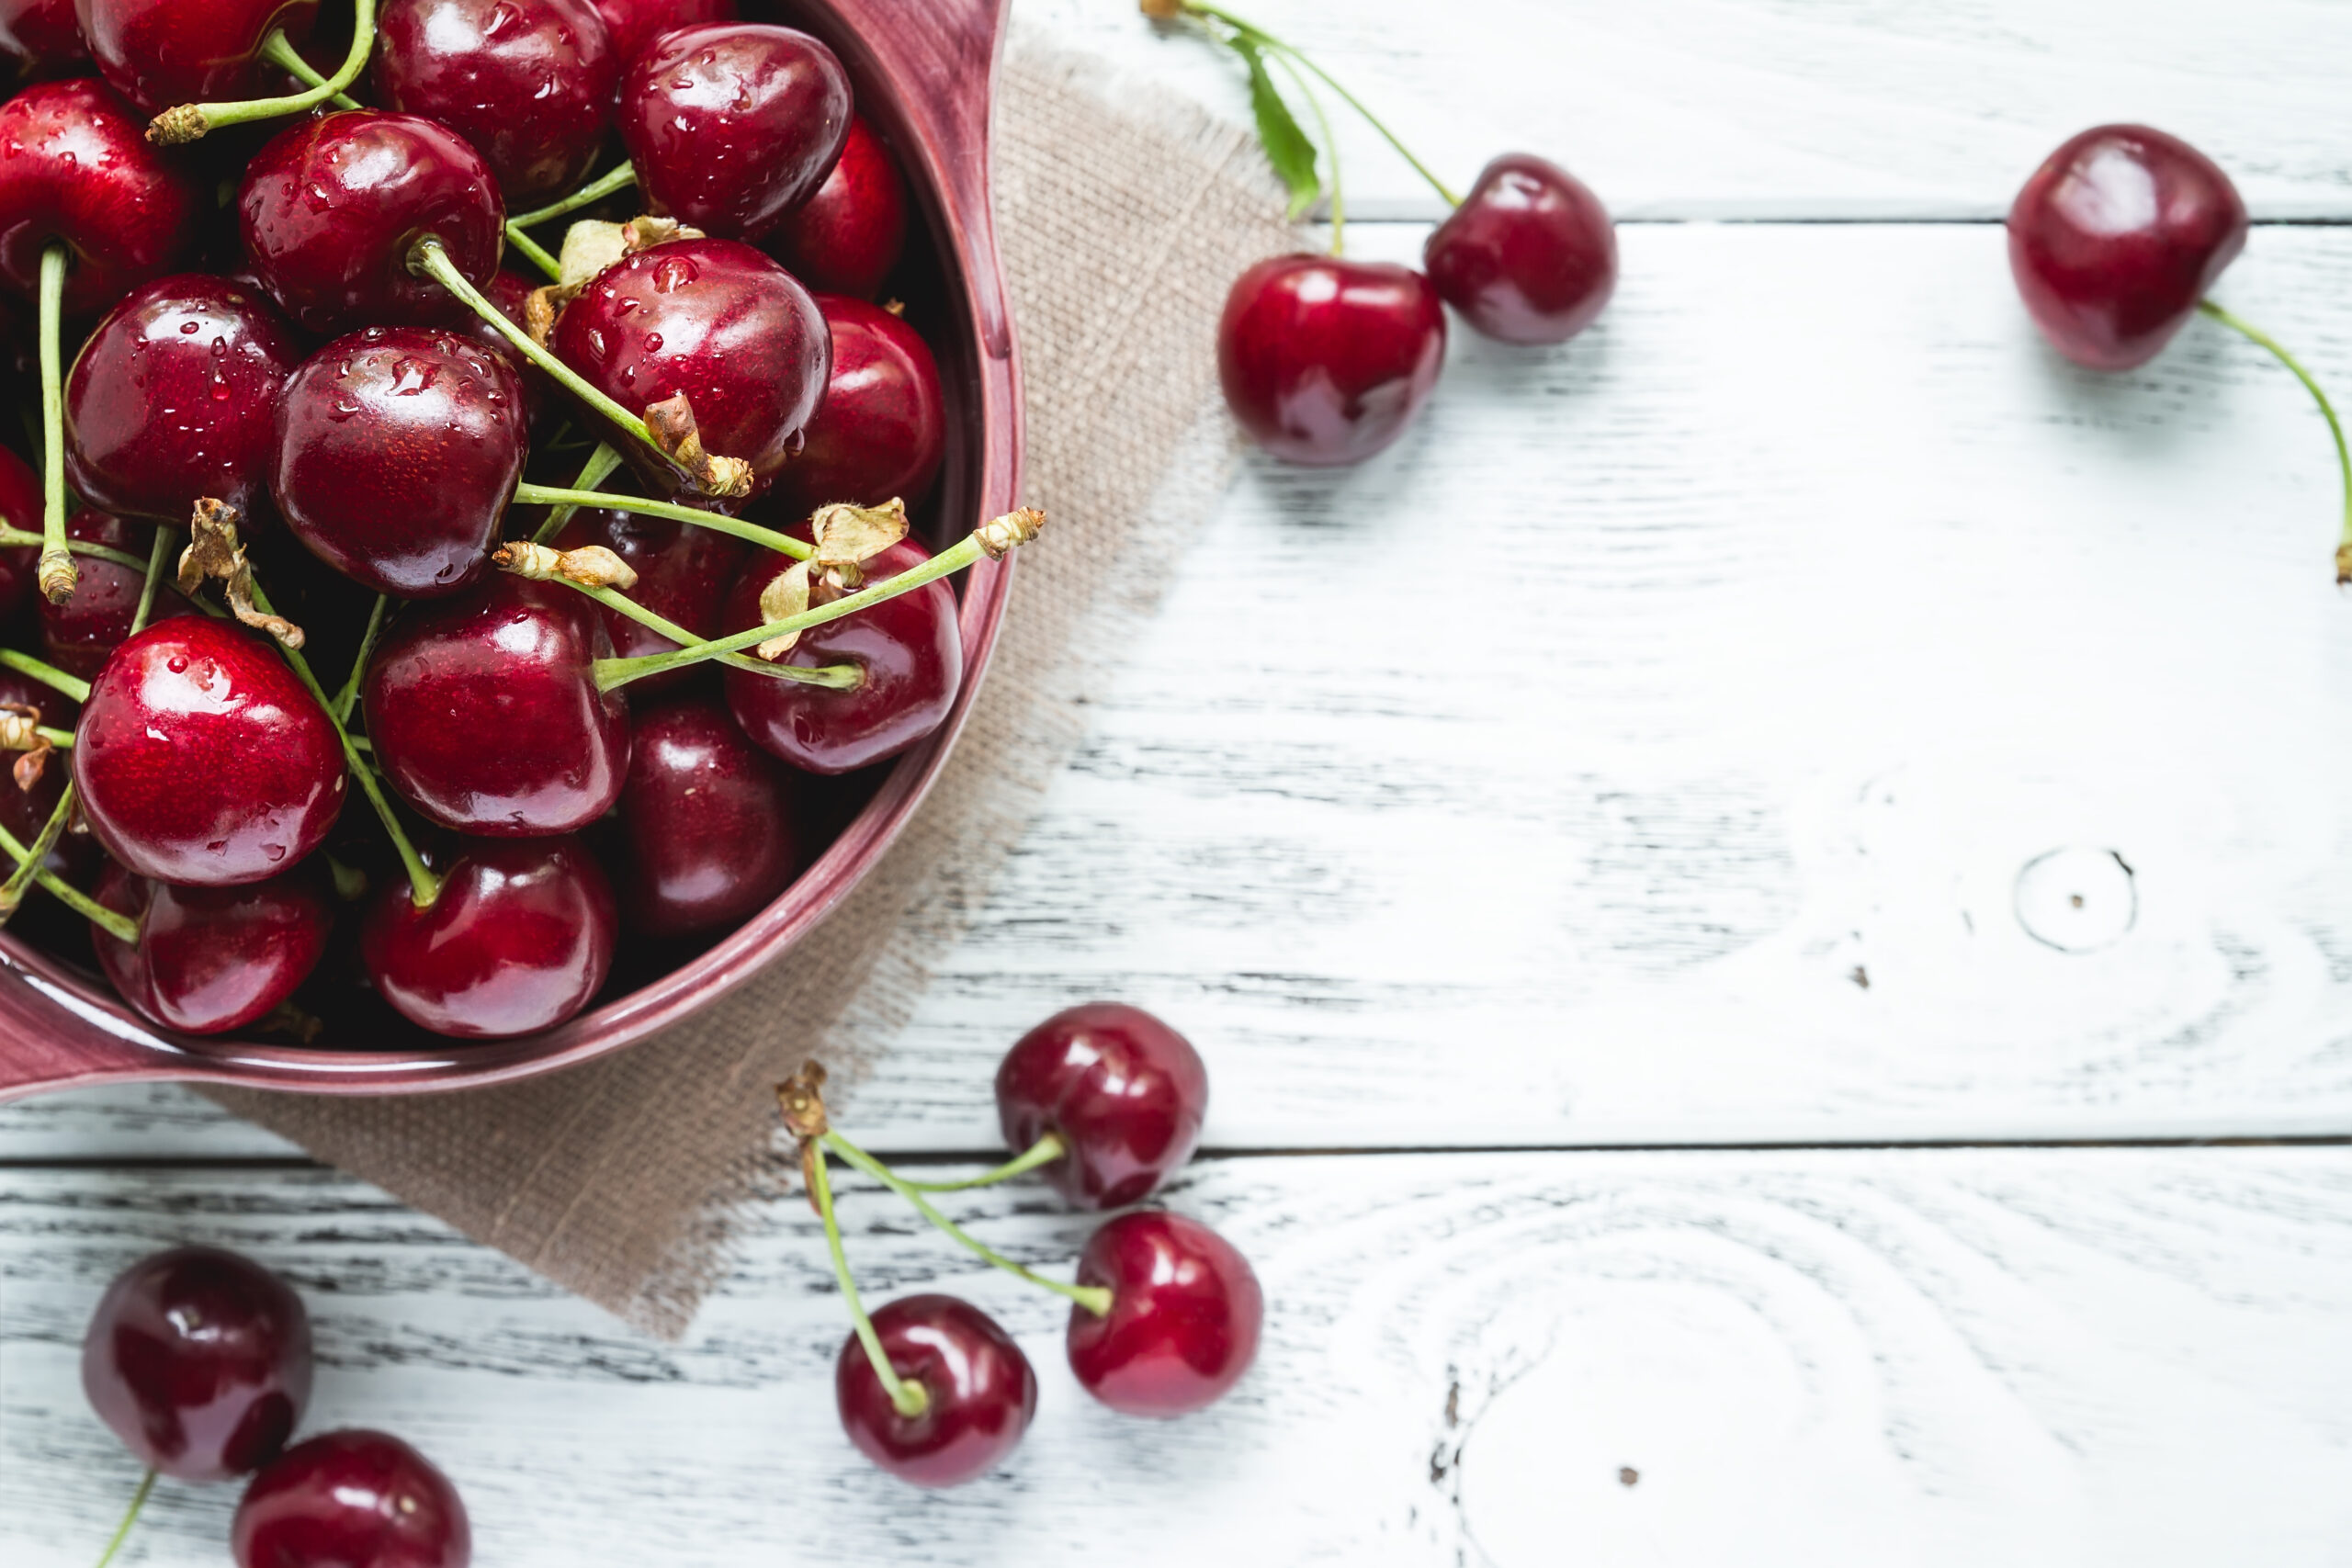 Ripe cherries in a bowl and scattered on a white wooden table.